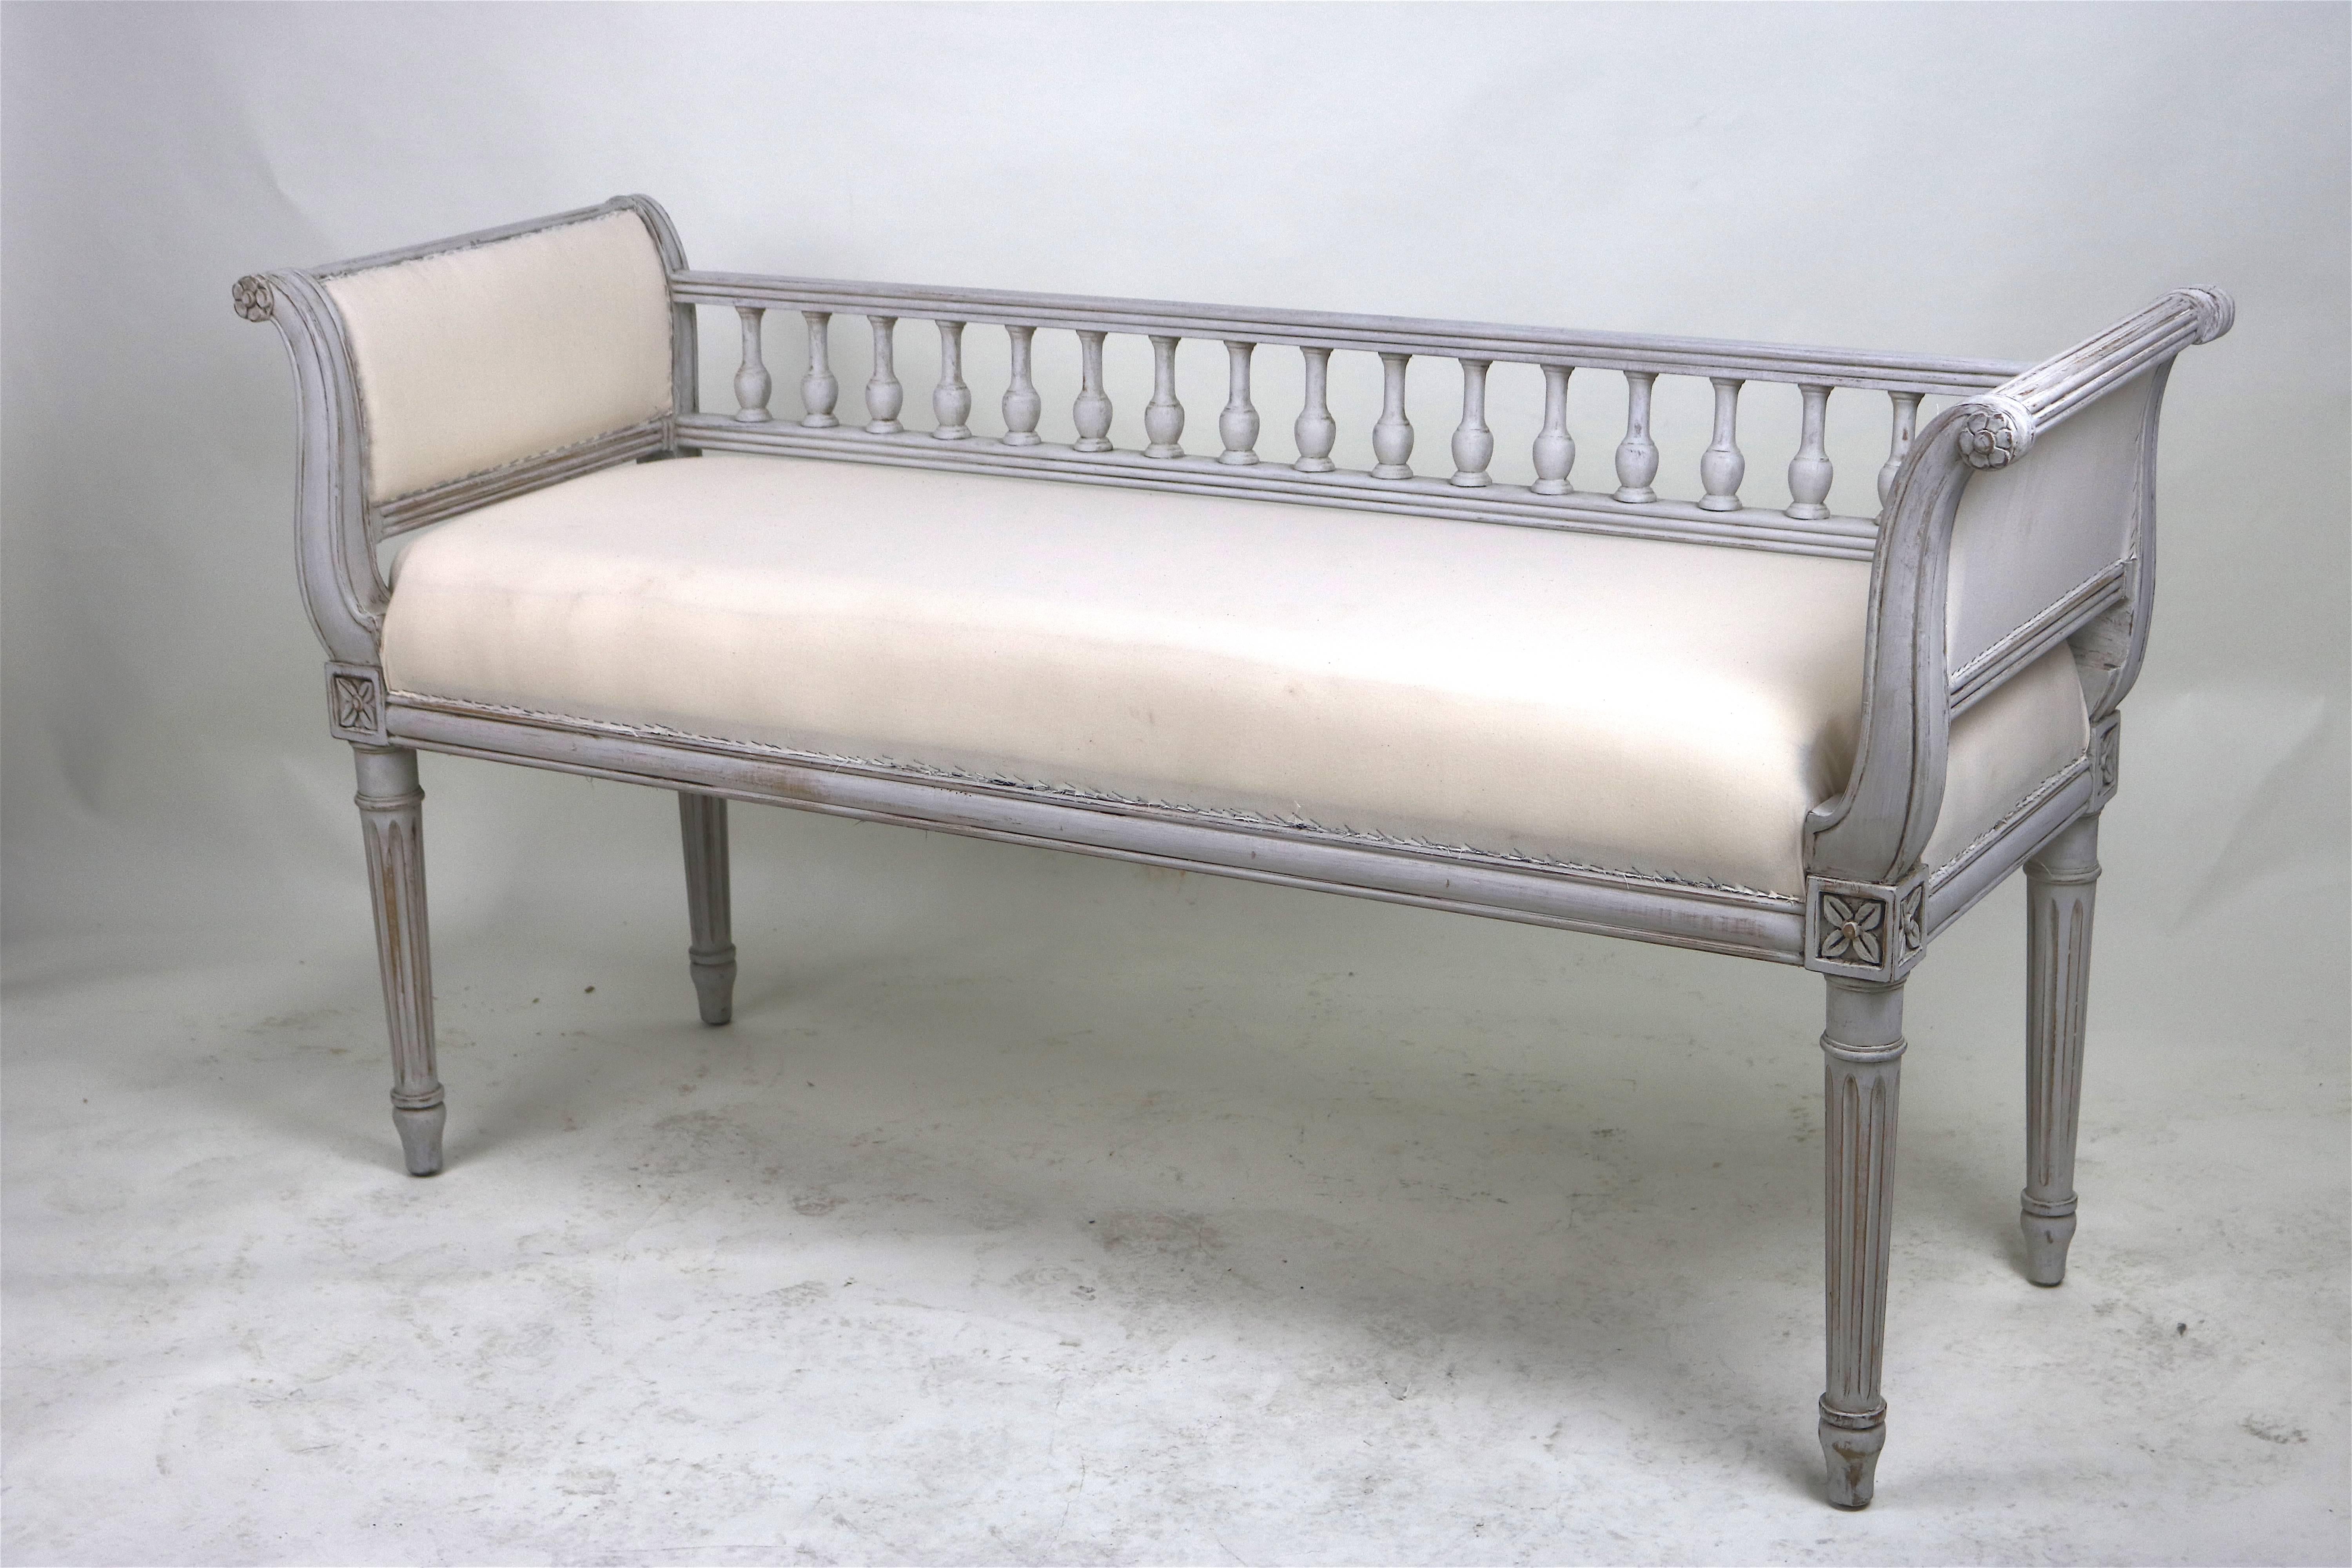 Hand-Carved Rare Period Swedish Gustavian Painted Spindle Back Bench, 19th Century